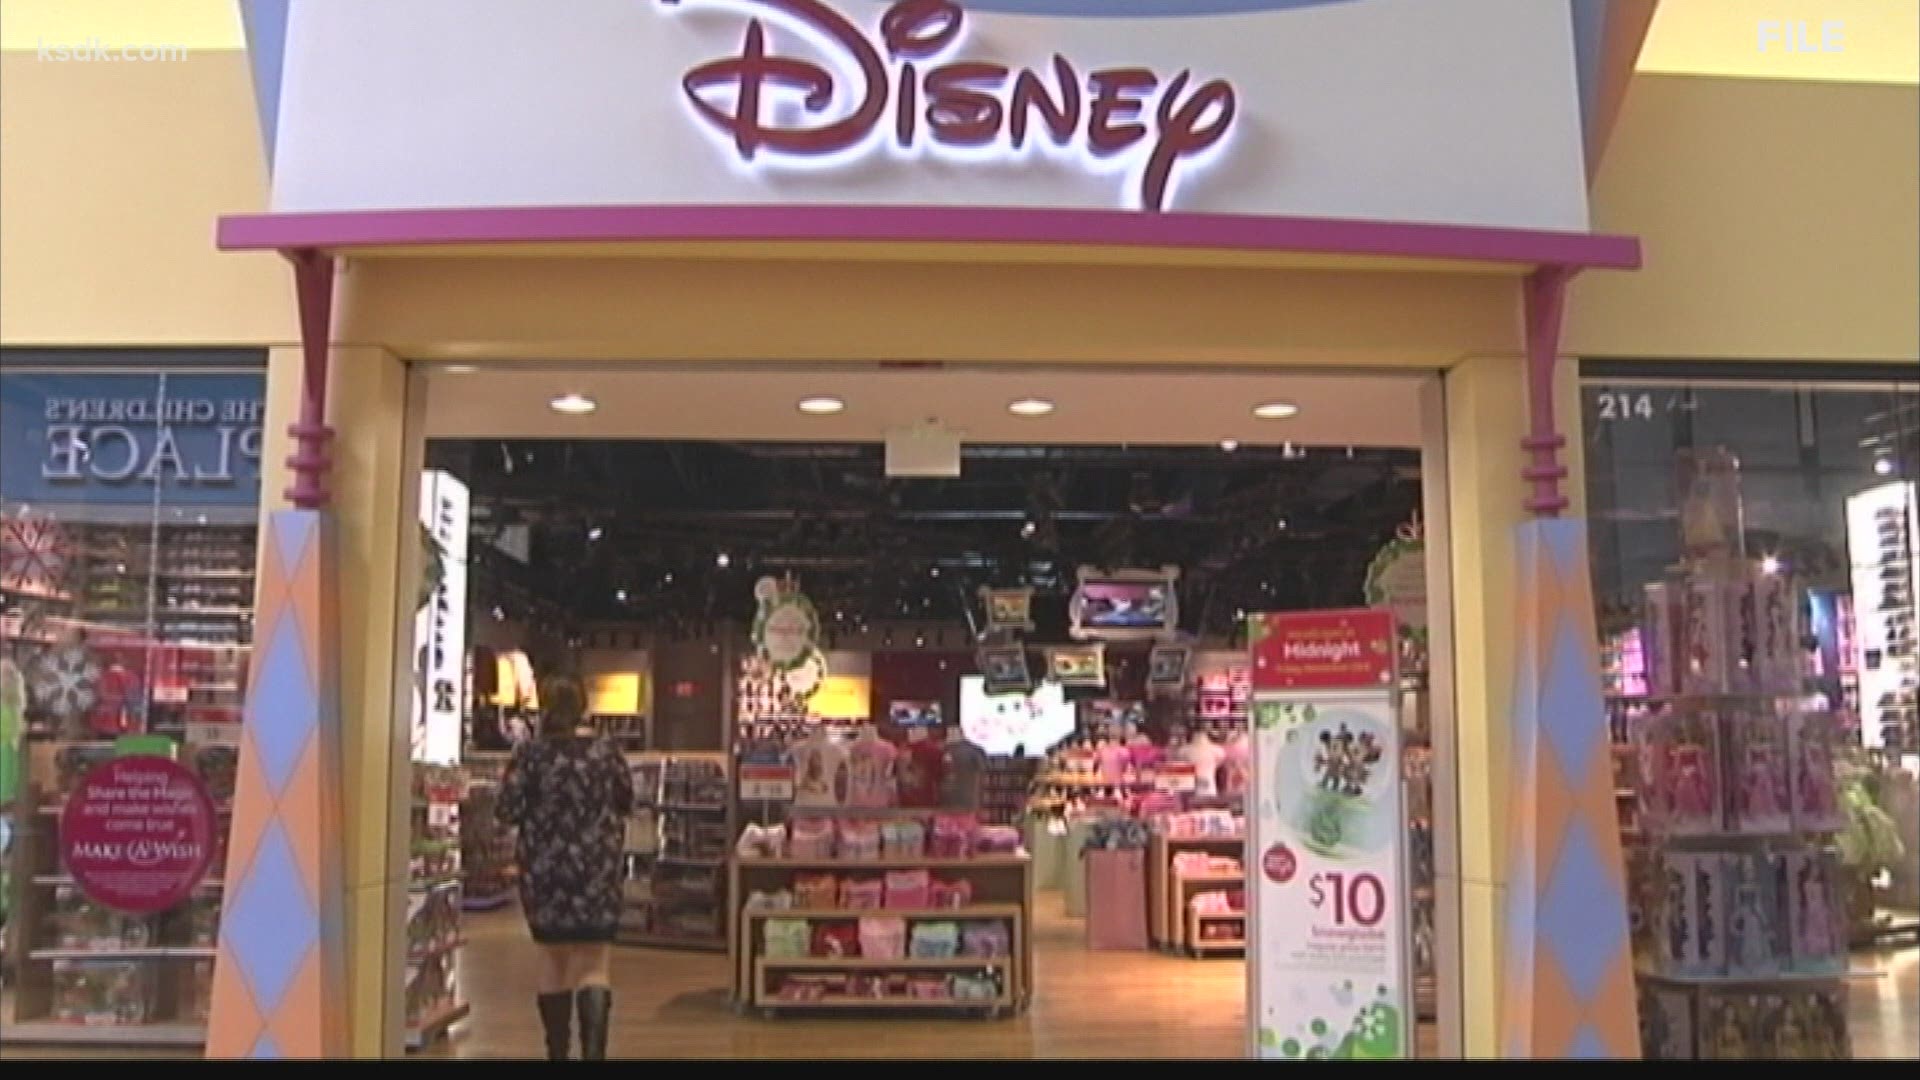 Disney Store closing sale 2021: See list of stores still open